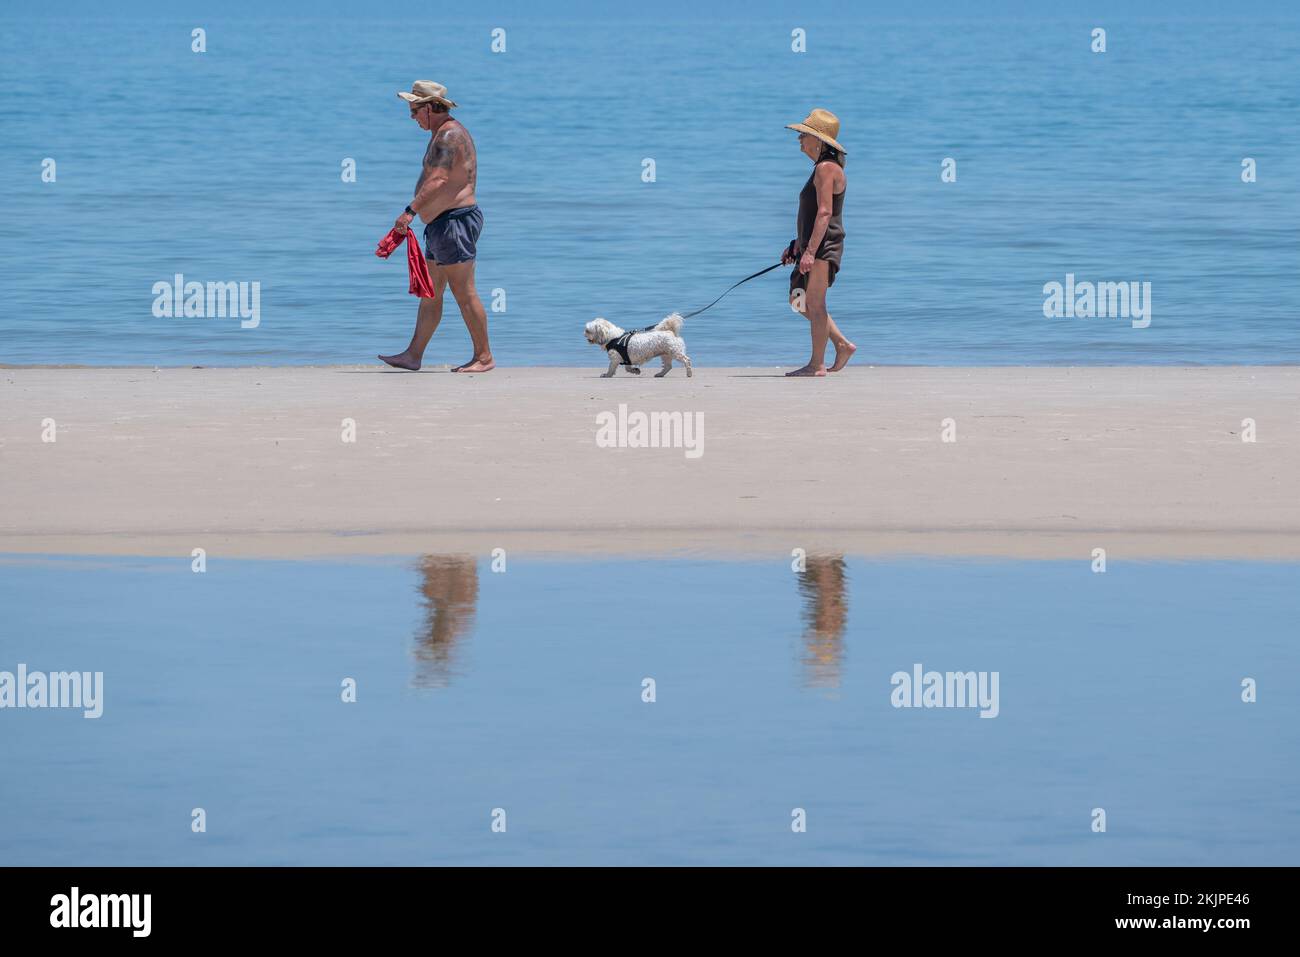 Adelaide, Australia. 25 November 2022.  People walkling their dog along the ocean shore during the hot weather  in Adelaide Australia as temperatures are forecast to reach above 30celsius. Credit: amer ghazzal/Alamy Live News Stock Photo